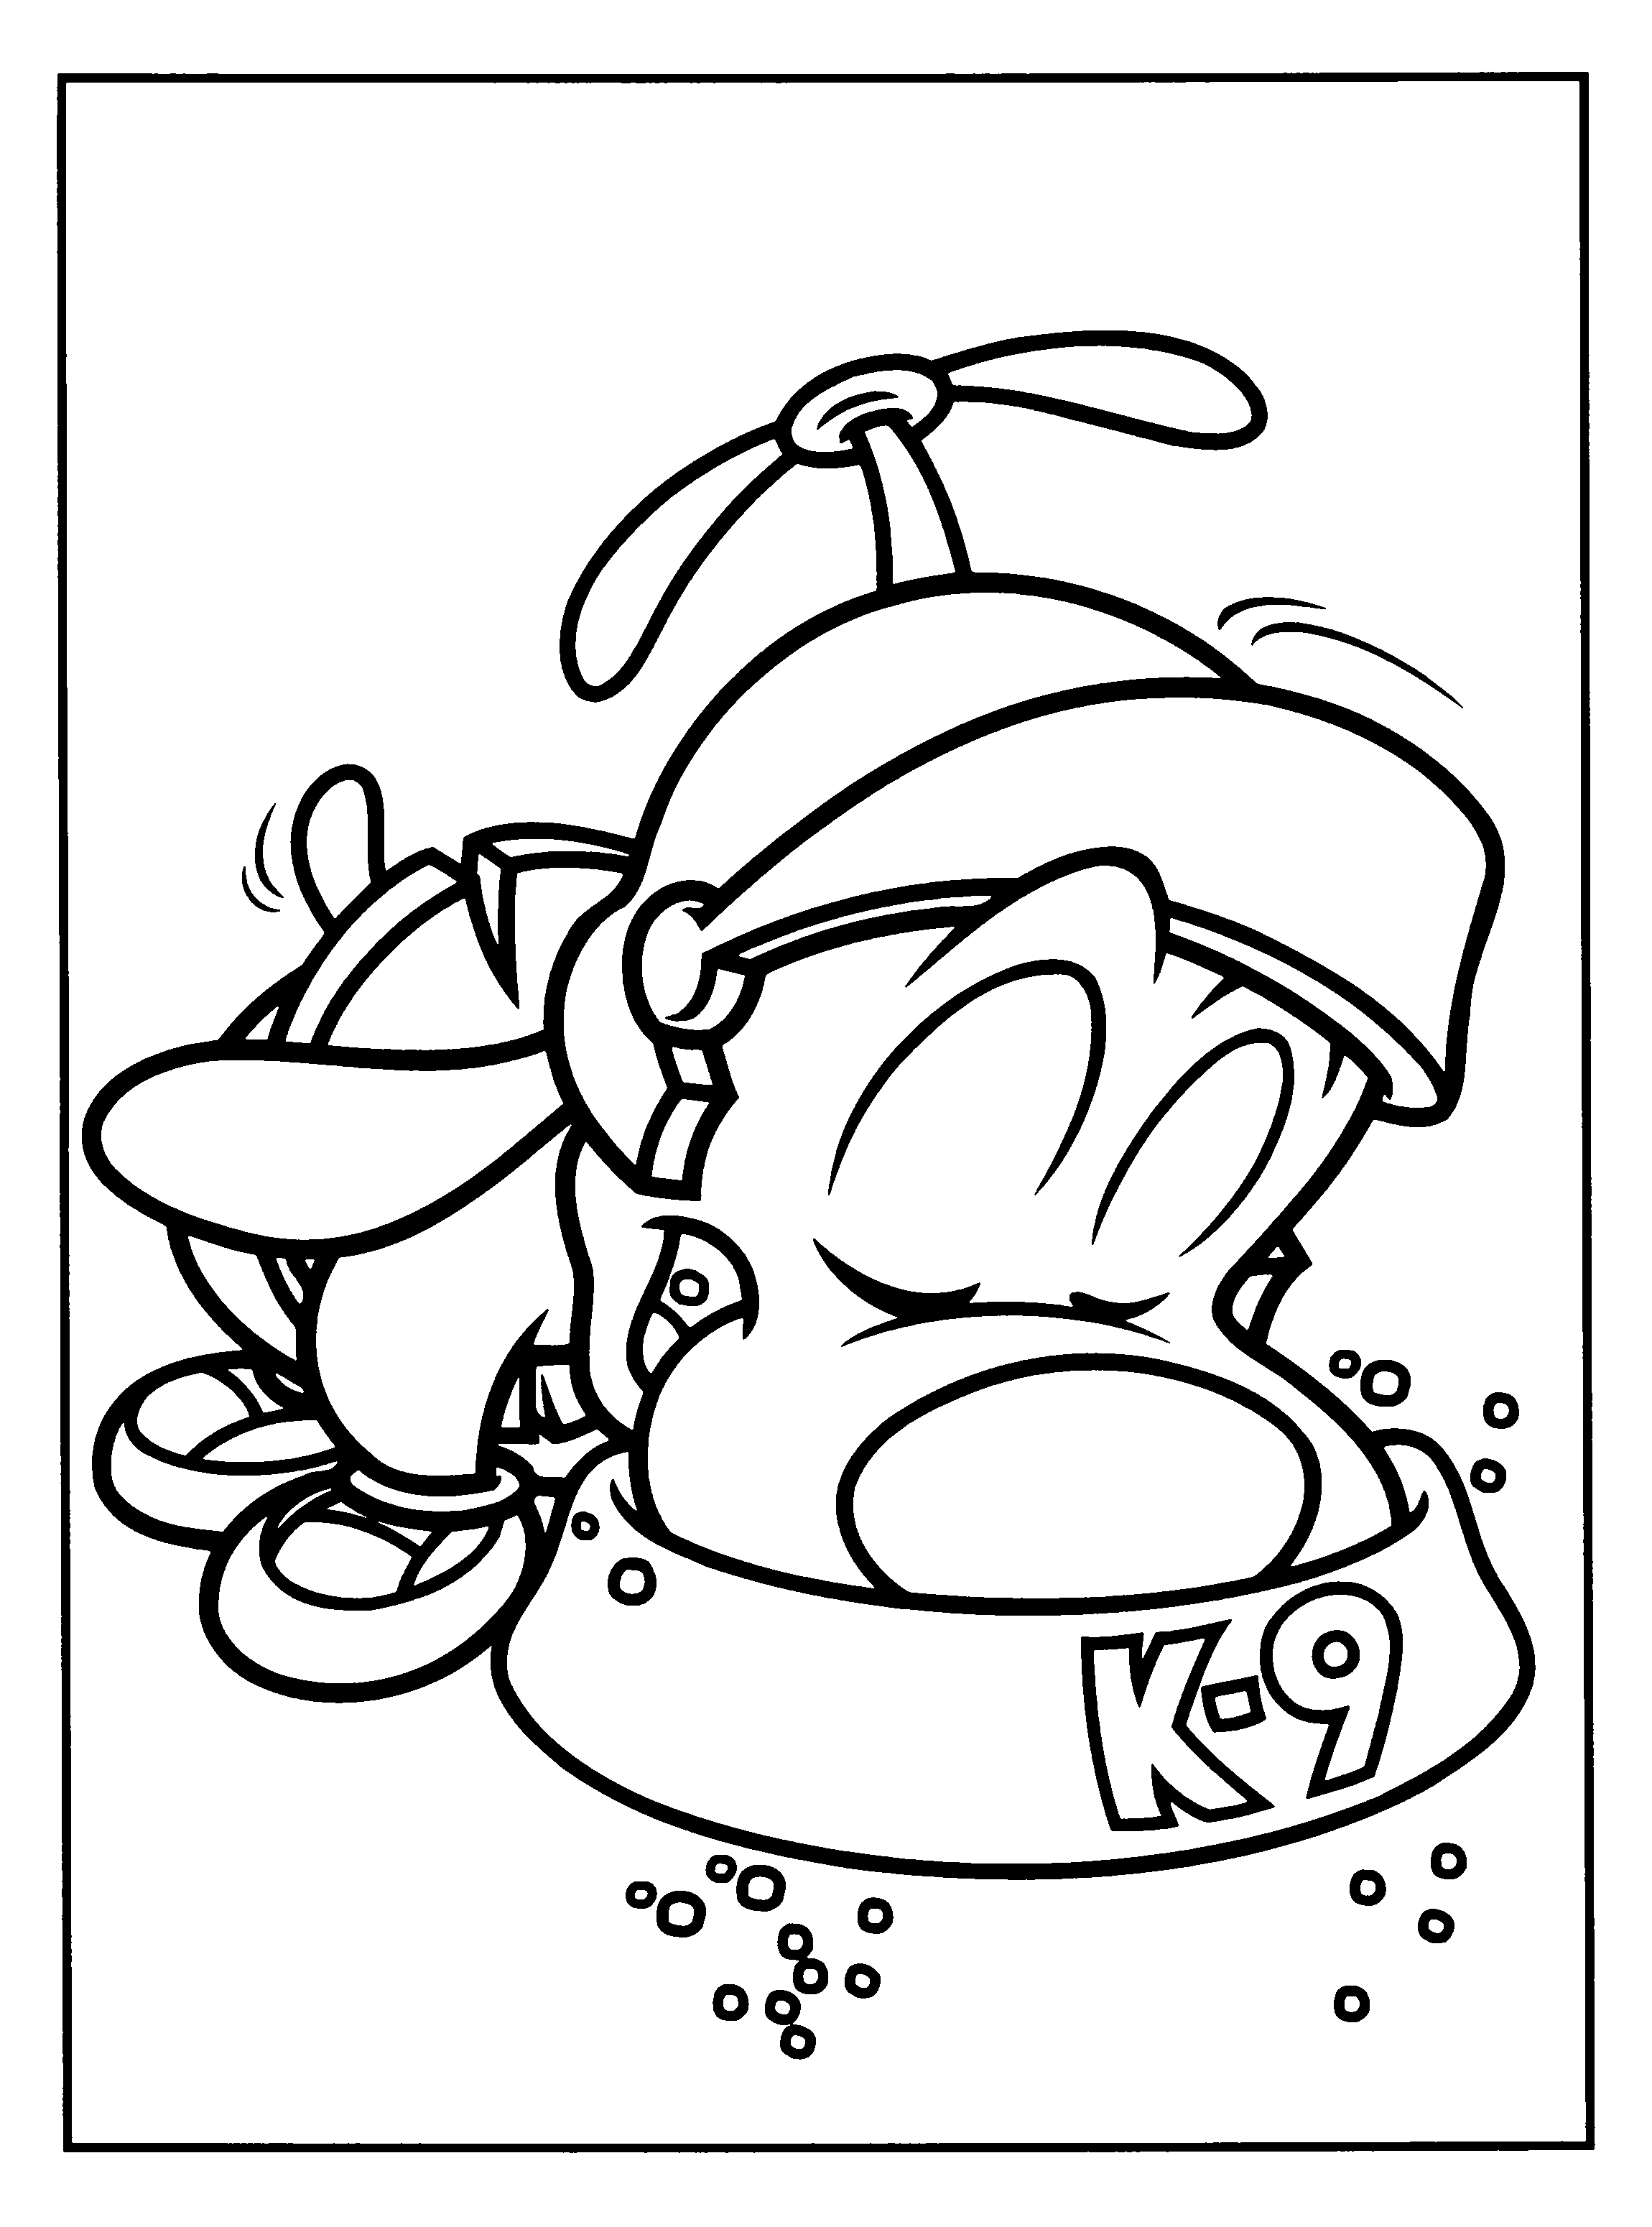 Looney tunes Coloring Pages